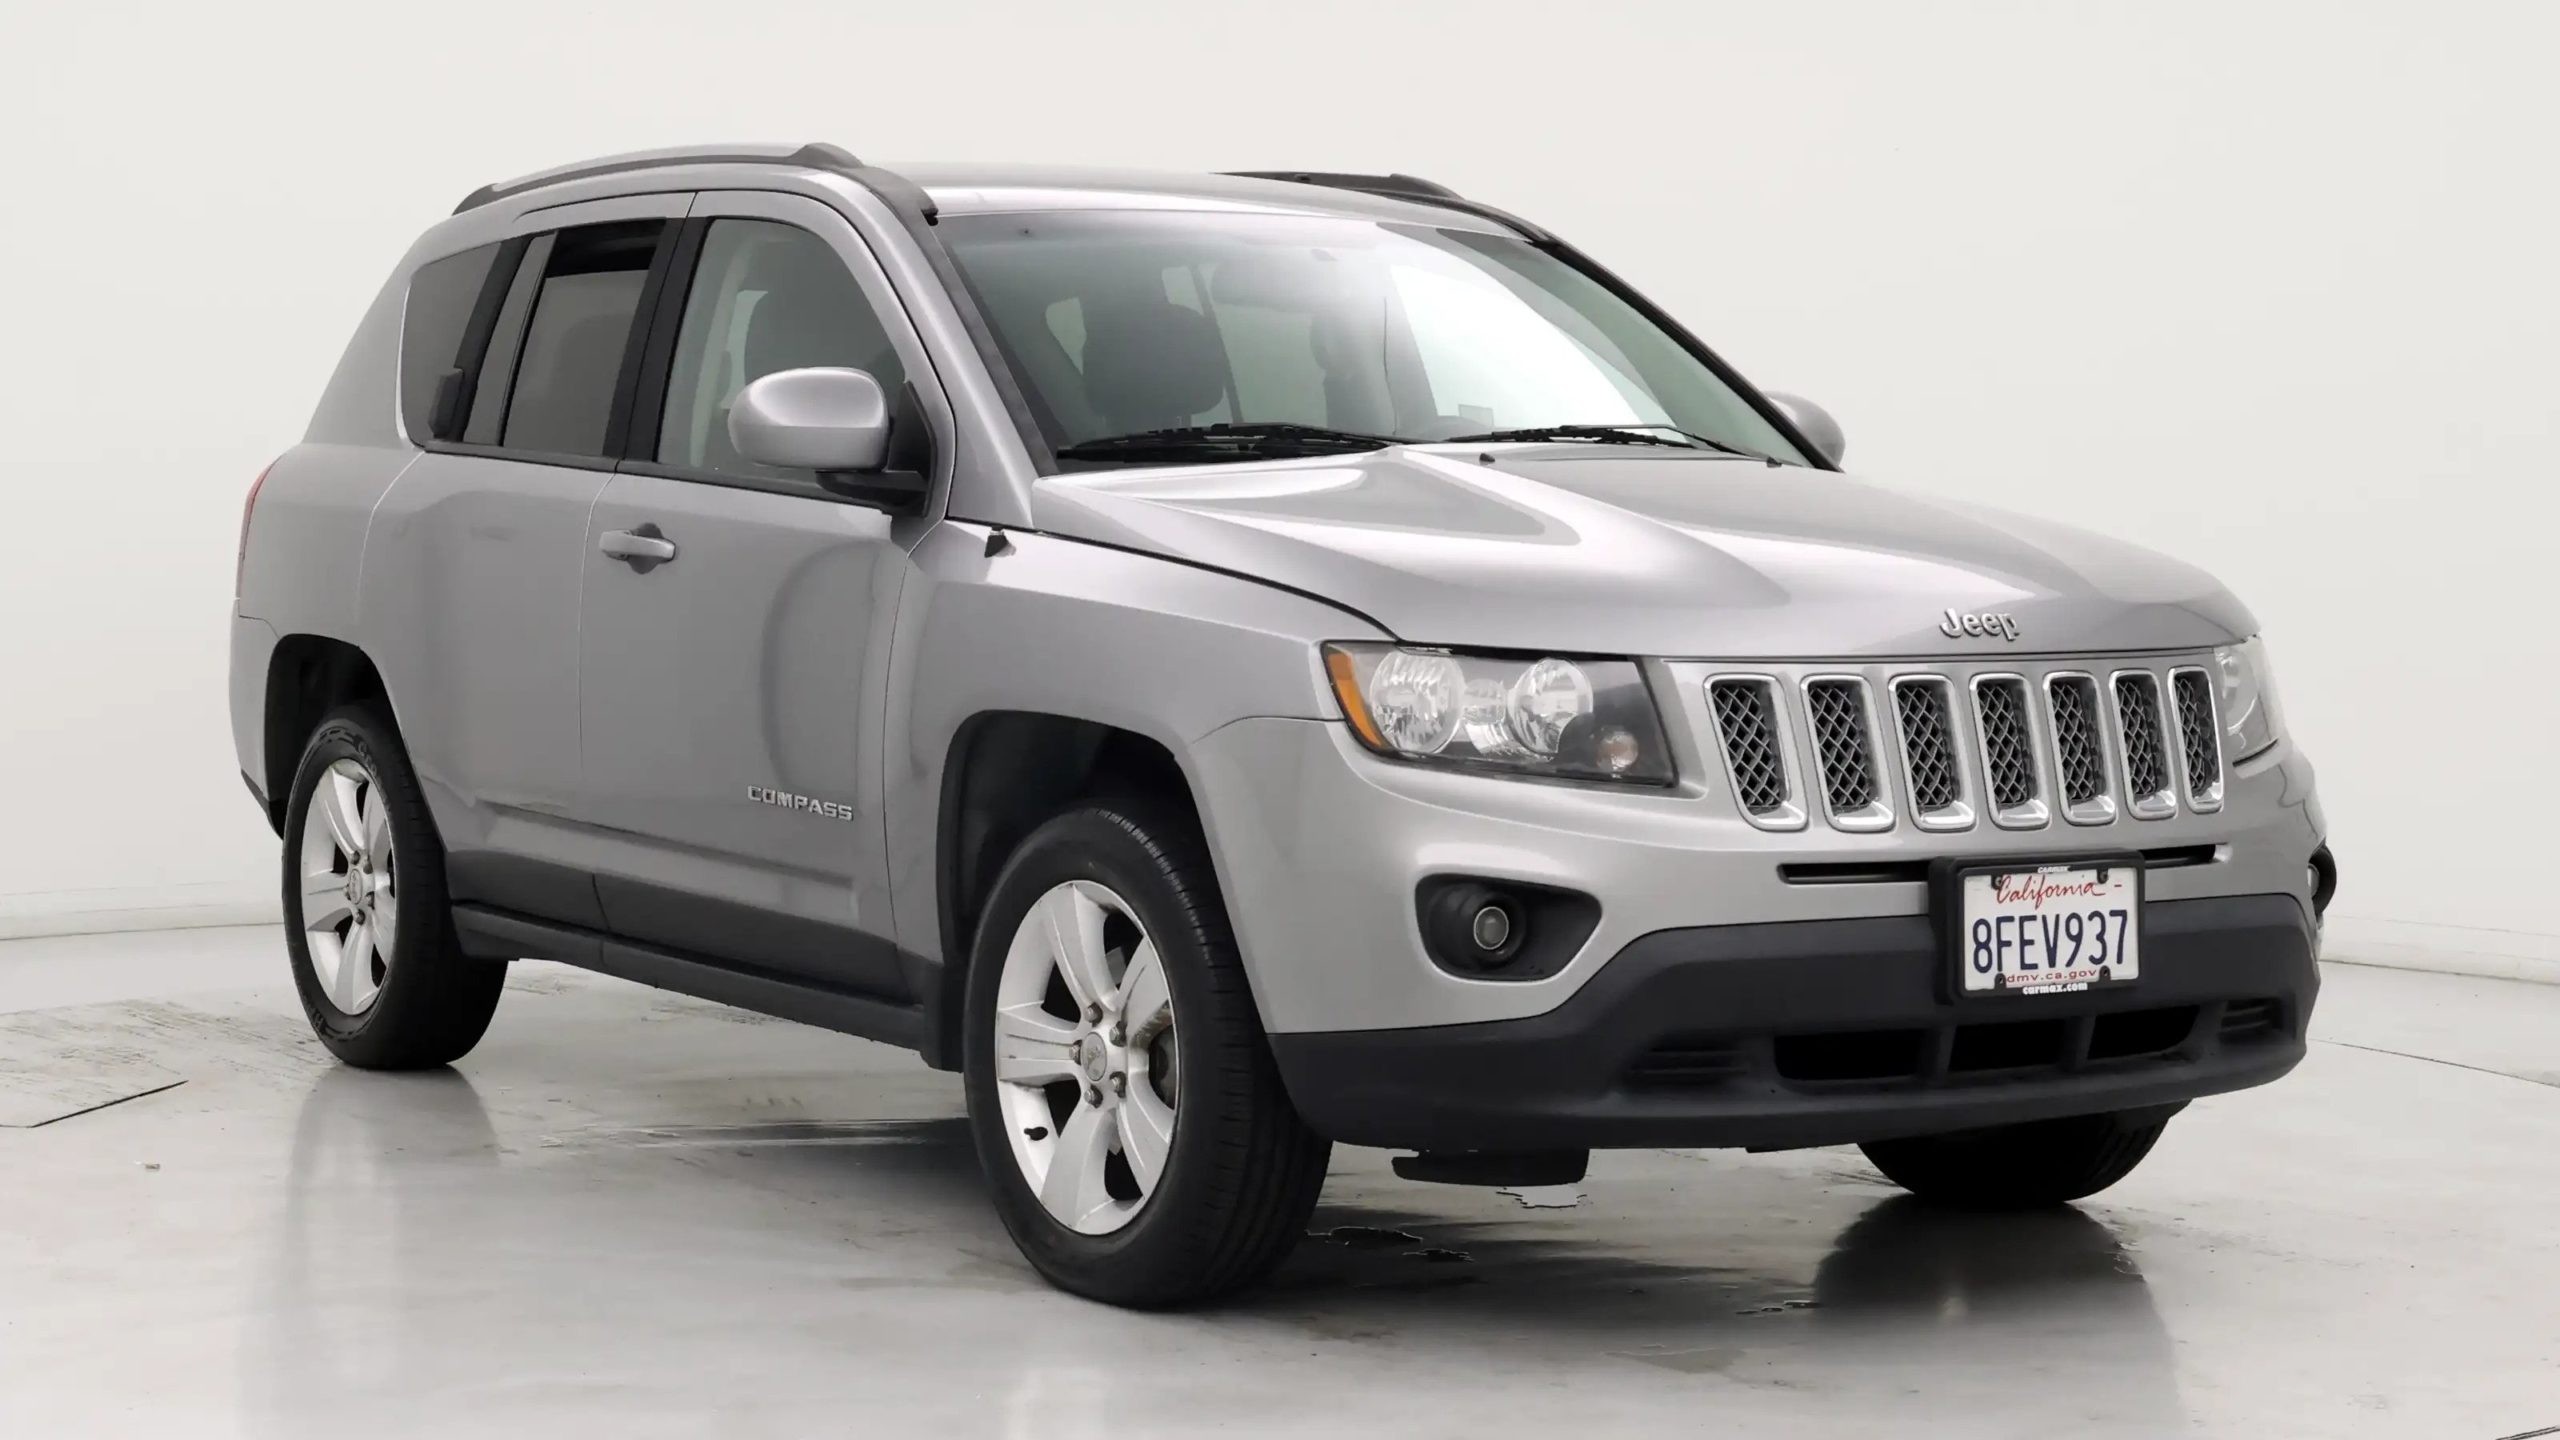 Jeep Compass Lost Key Replacement